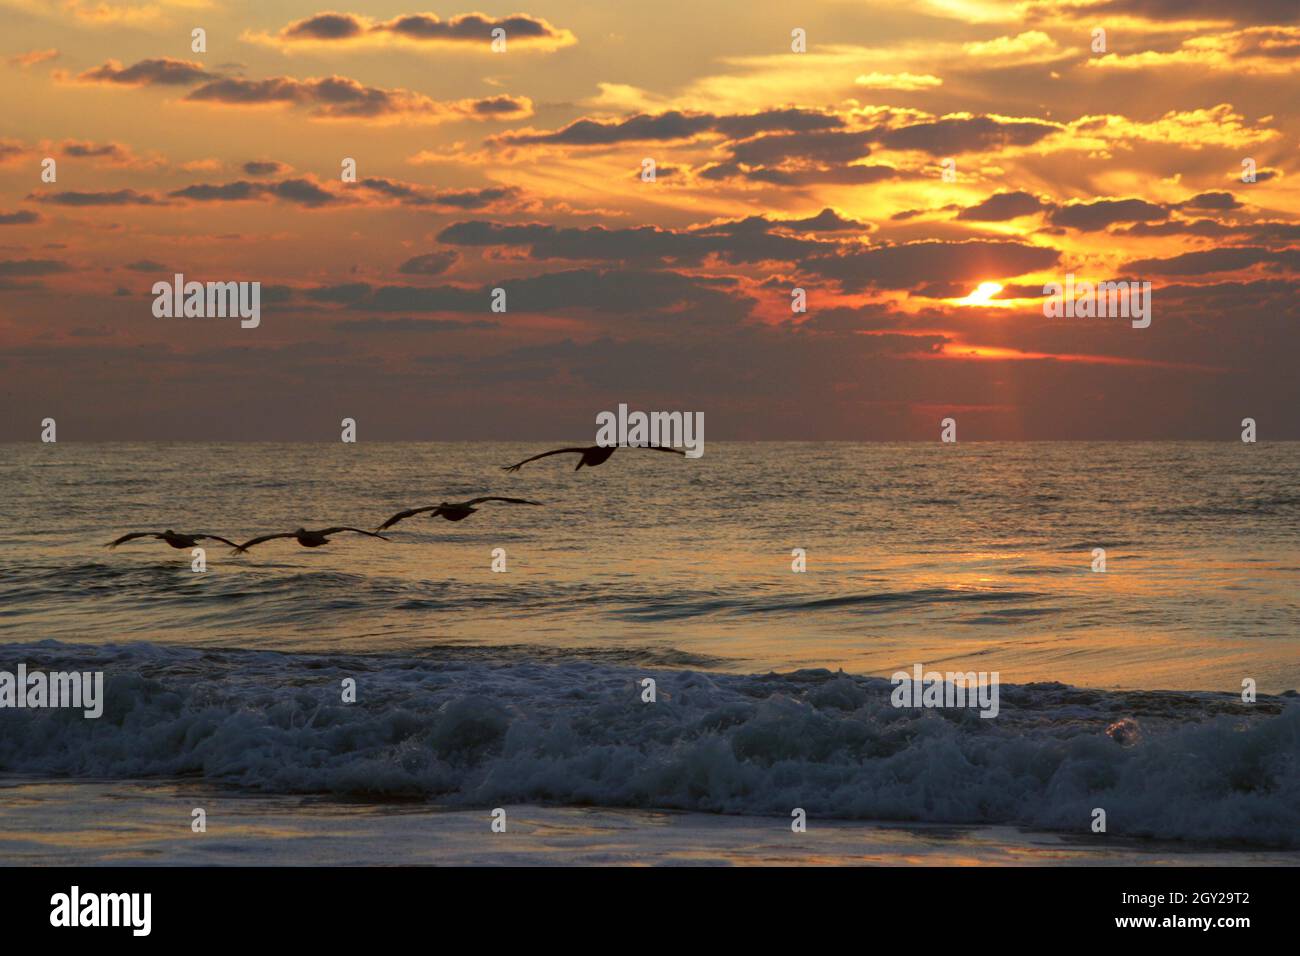 Four pelicans huntinting as their silhouettes glide together in a line over a scenic sea at sunset Stock Photo